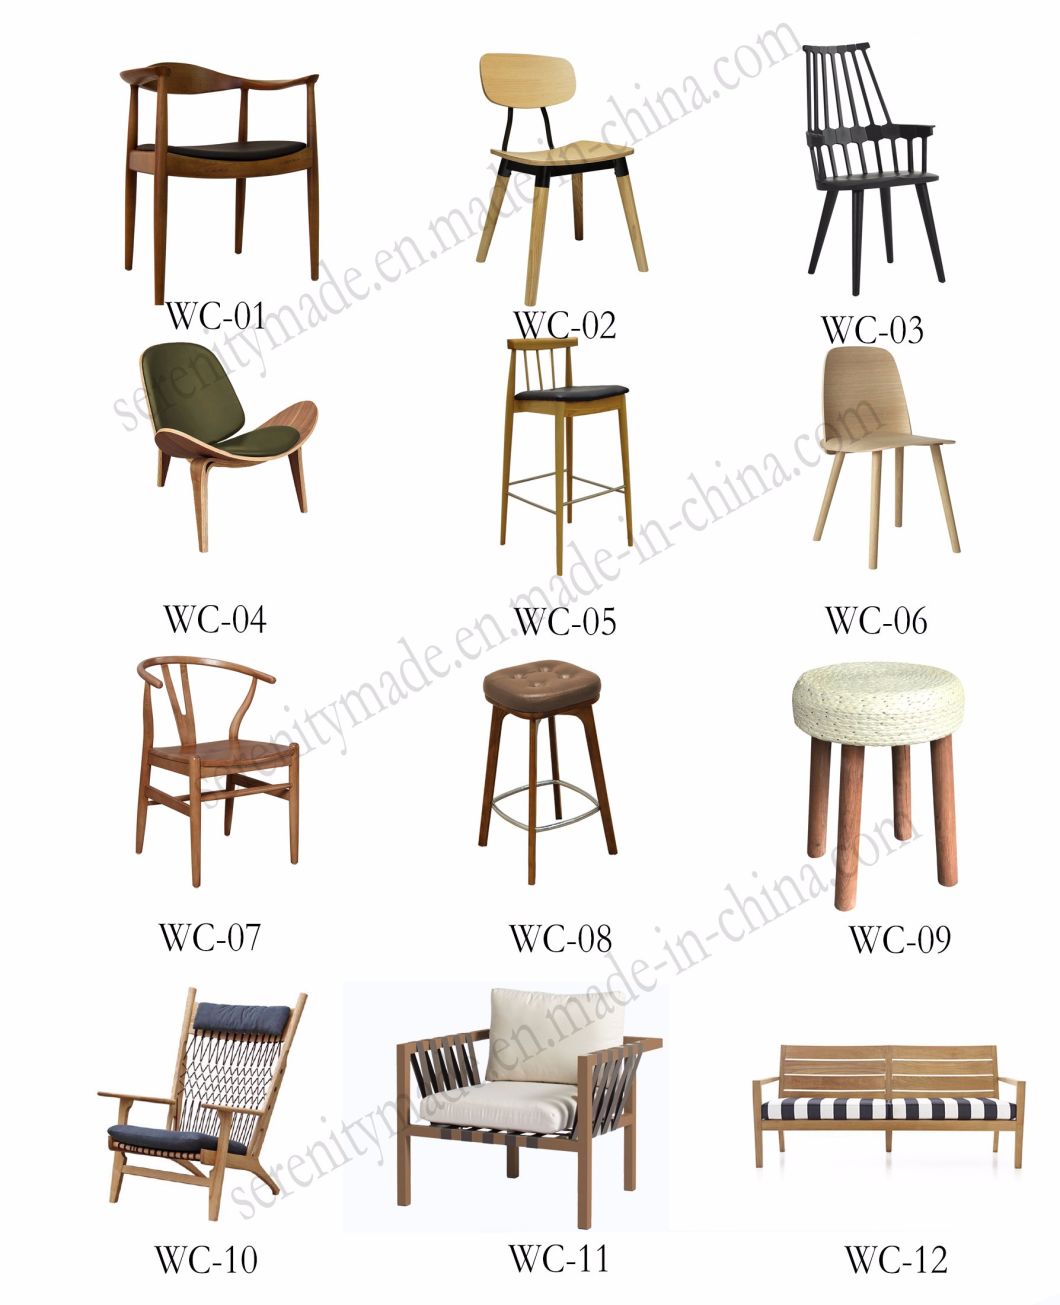 China Wooden Chairs Furniture Supplier Wooden Chairs for Restaurant